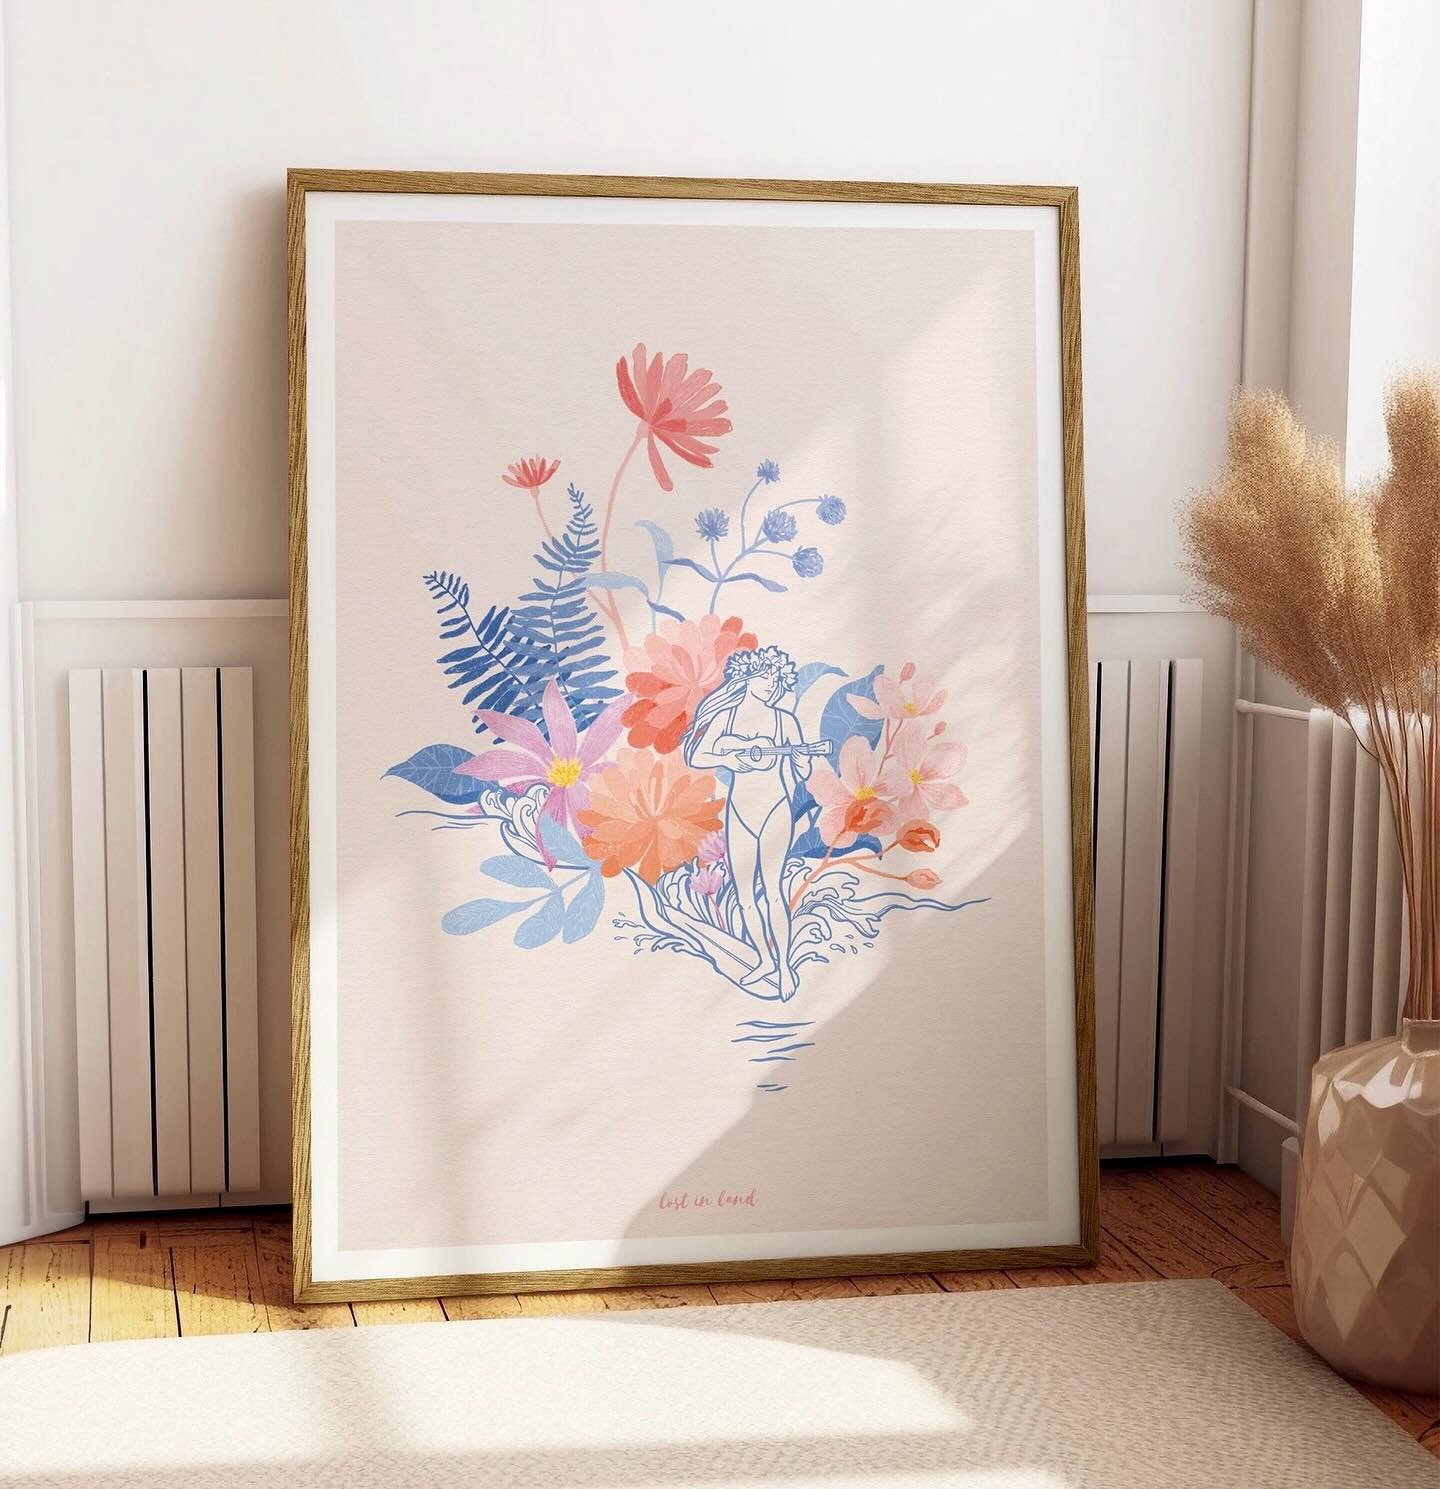 UKULELE SURFER

🌸Available in the shop🌸

Enjoy 10% OFF using the code : FLOWER10 at the checkout

👉Link of the shop in BIO

👉Find it in 3 different sizes, printed on textured German cotton paper.

#flowers #ﬂowerillustration #floralillustration #